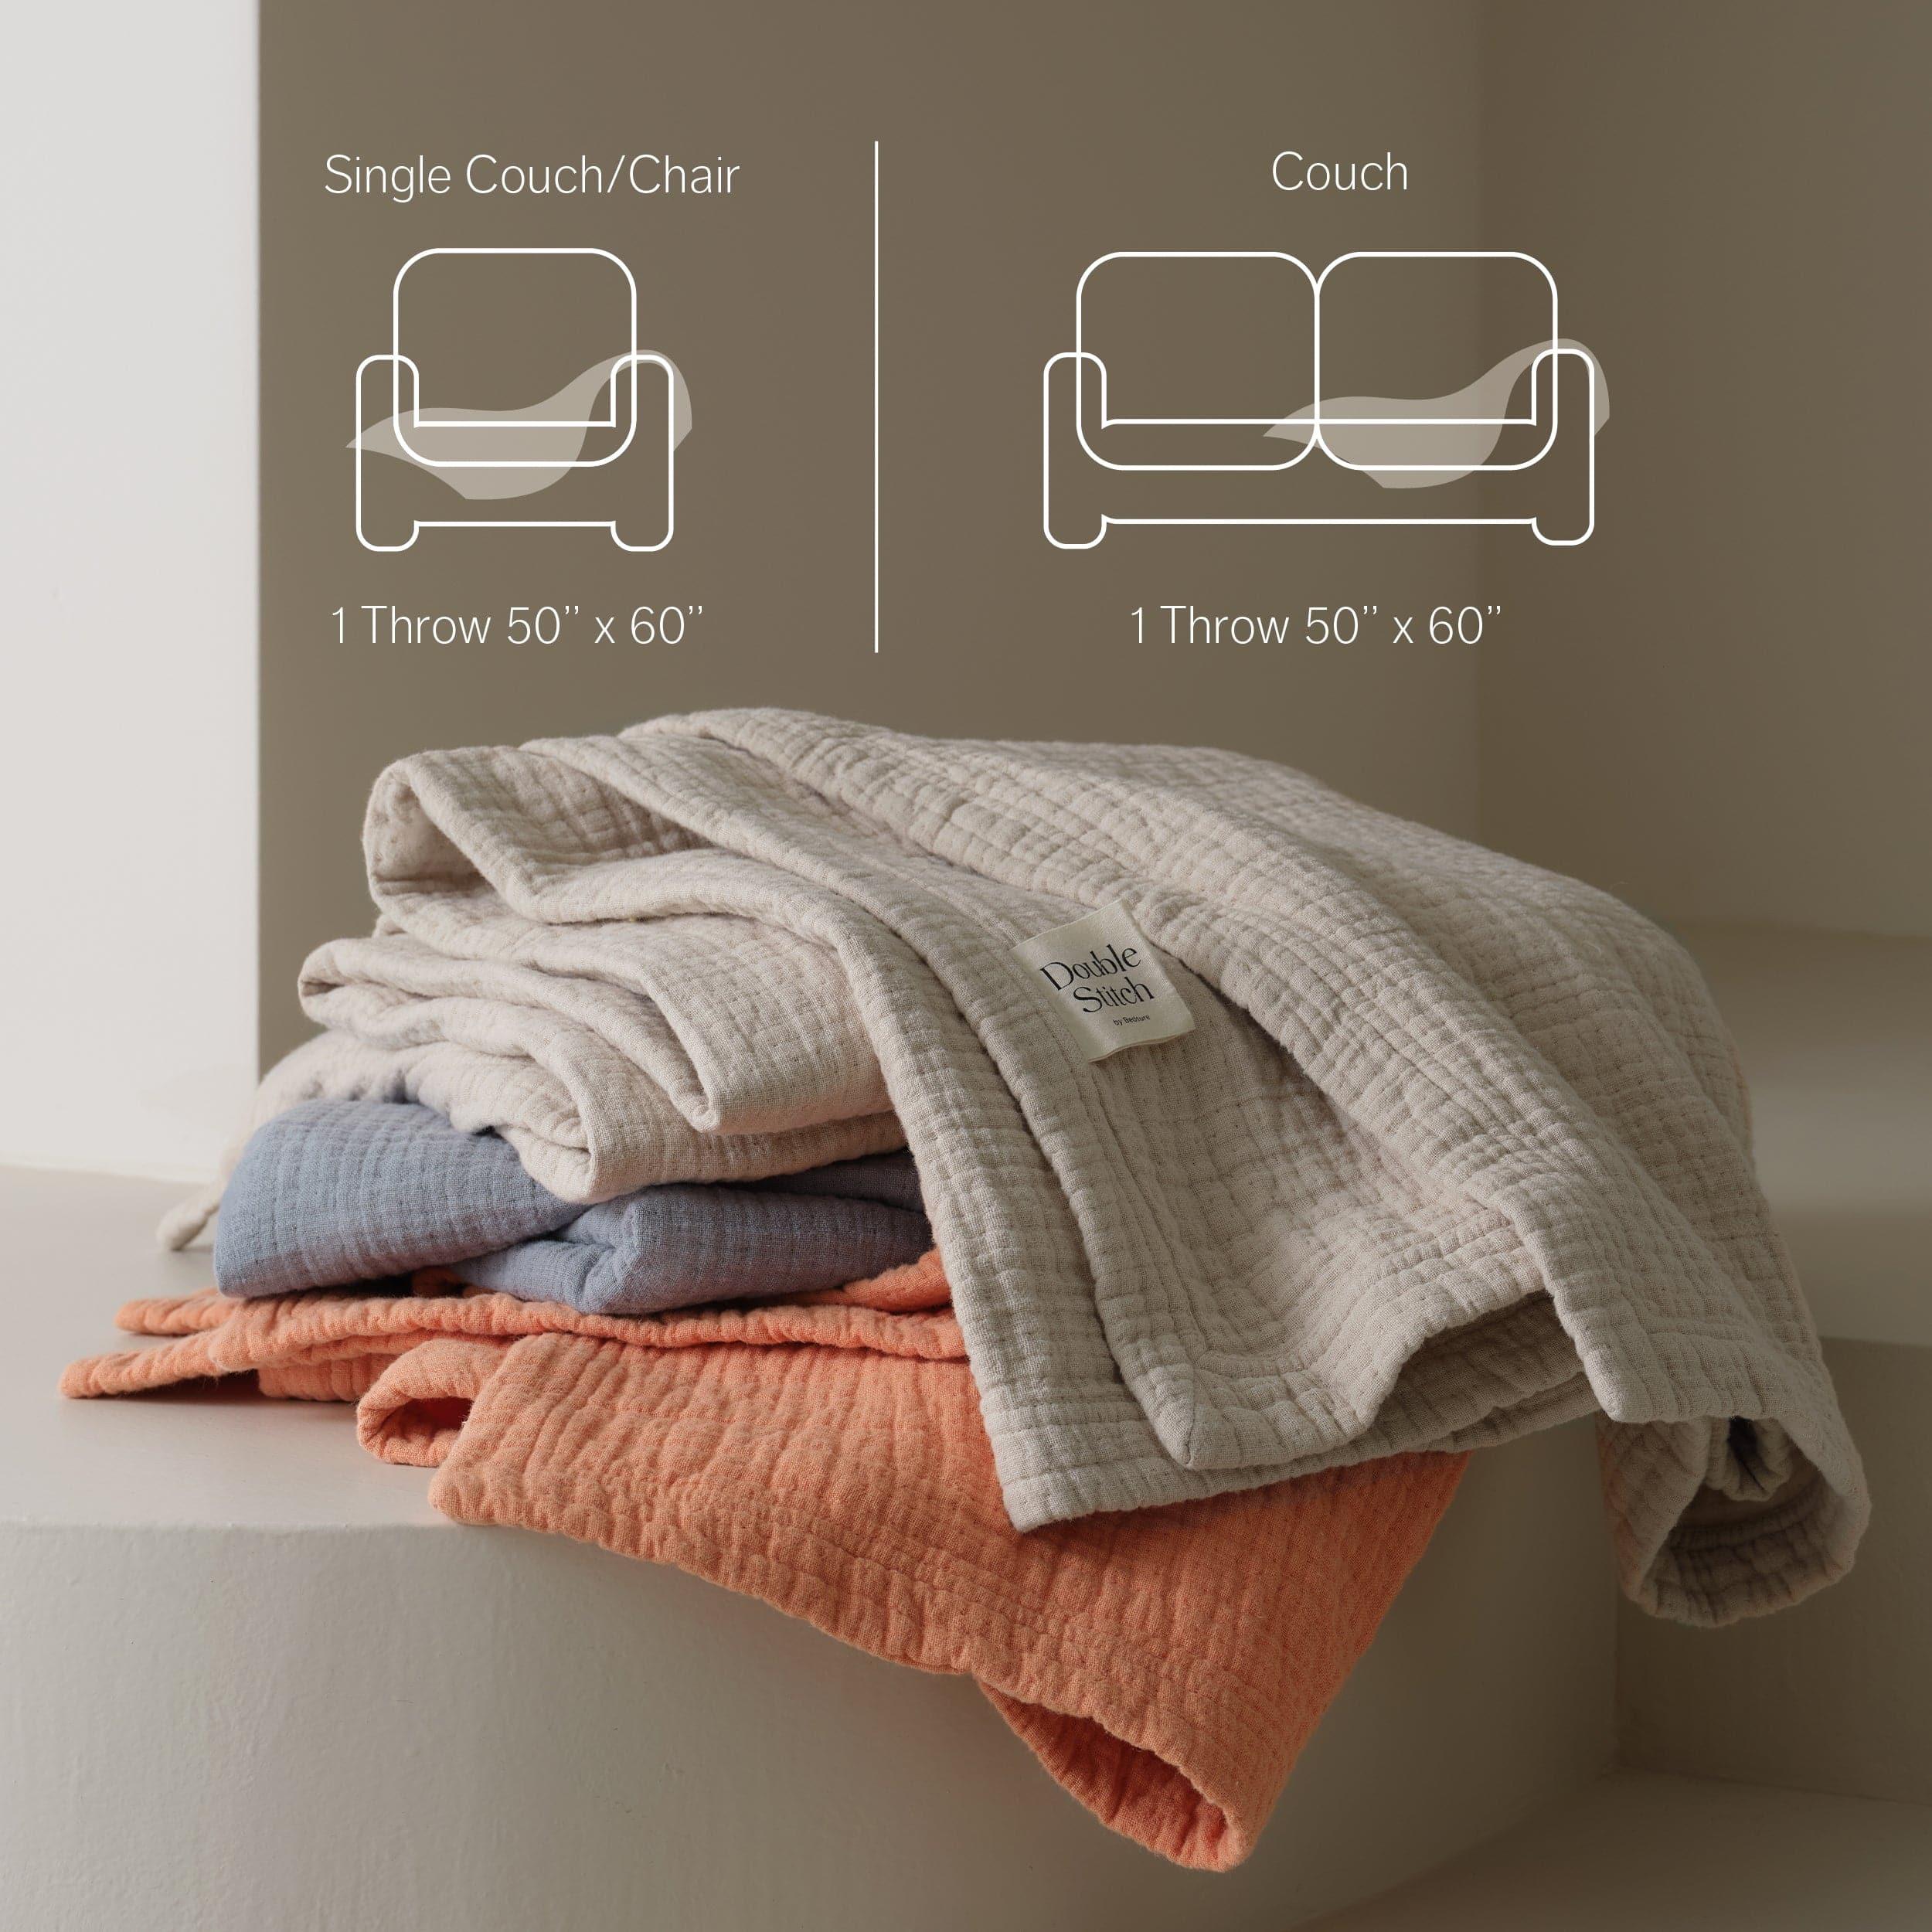 The modern throw blanket features a sleek and minimalist design.